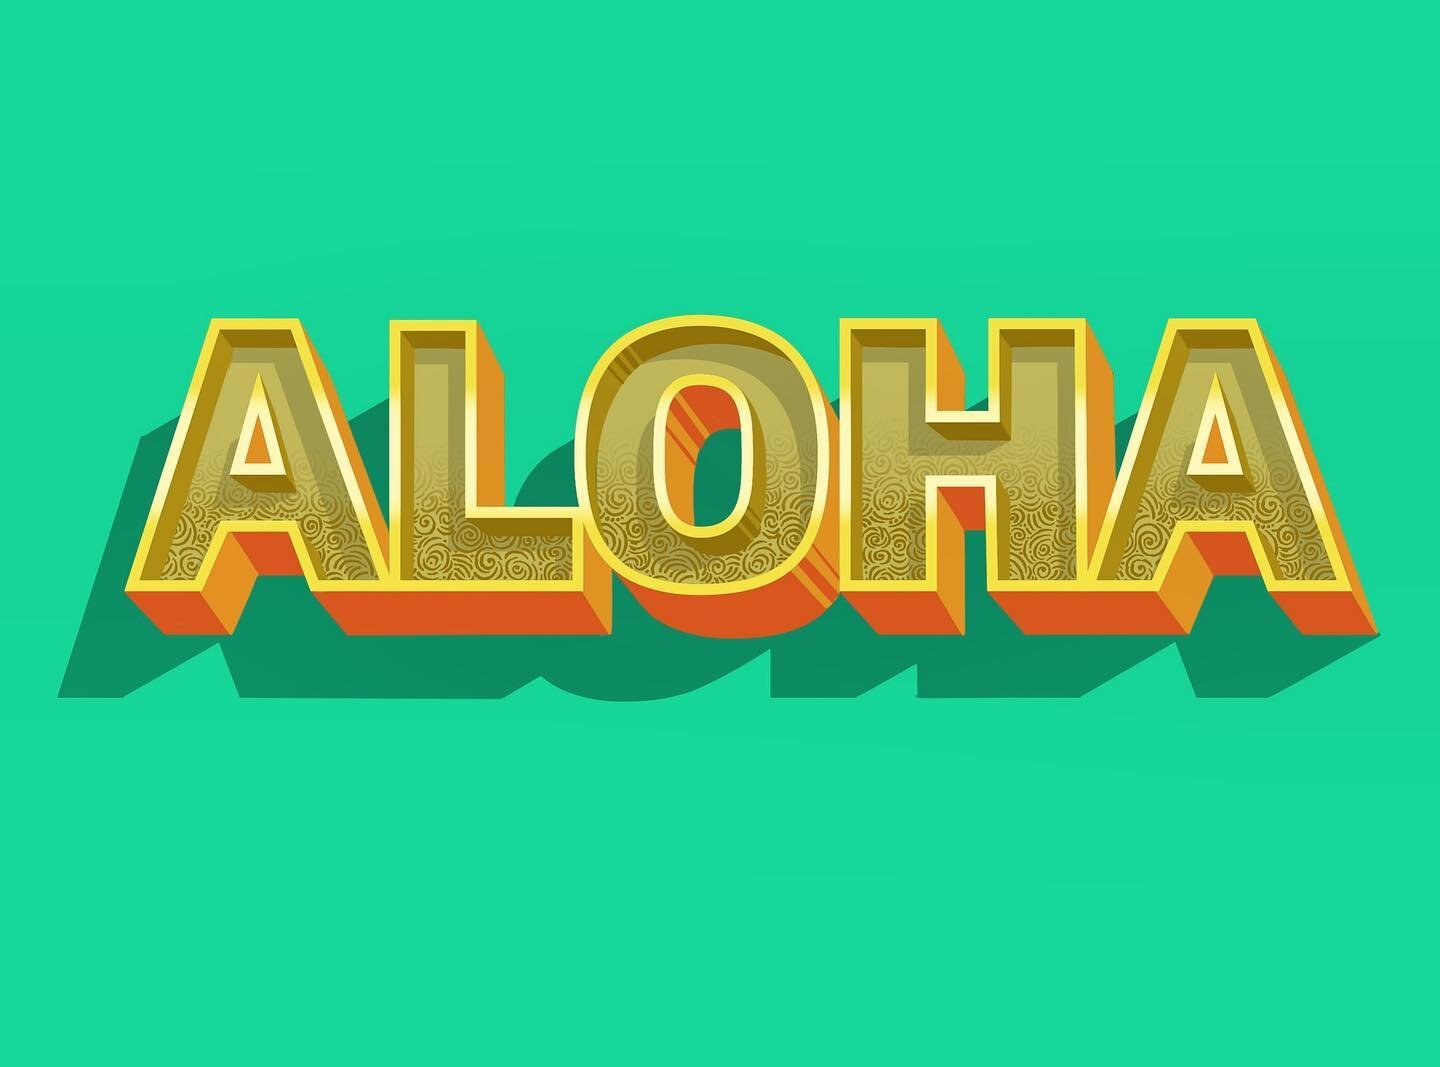 A lil fun with Aloha! 
#showyourletters #letters